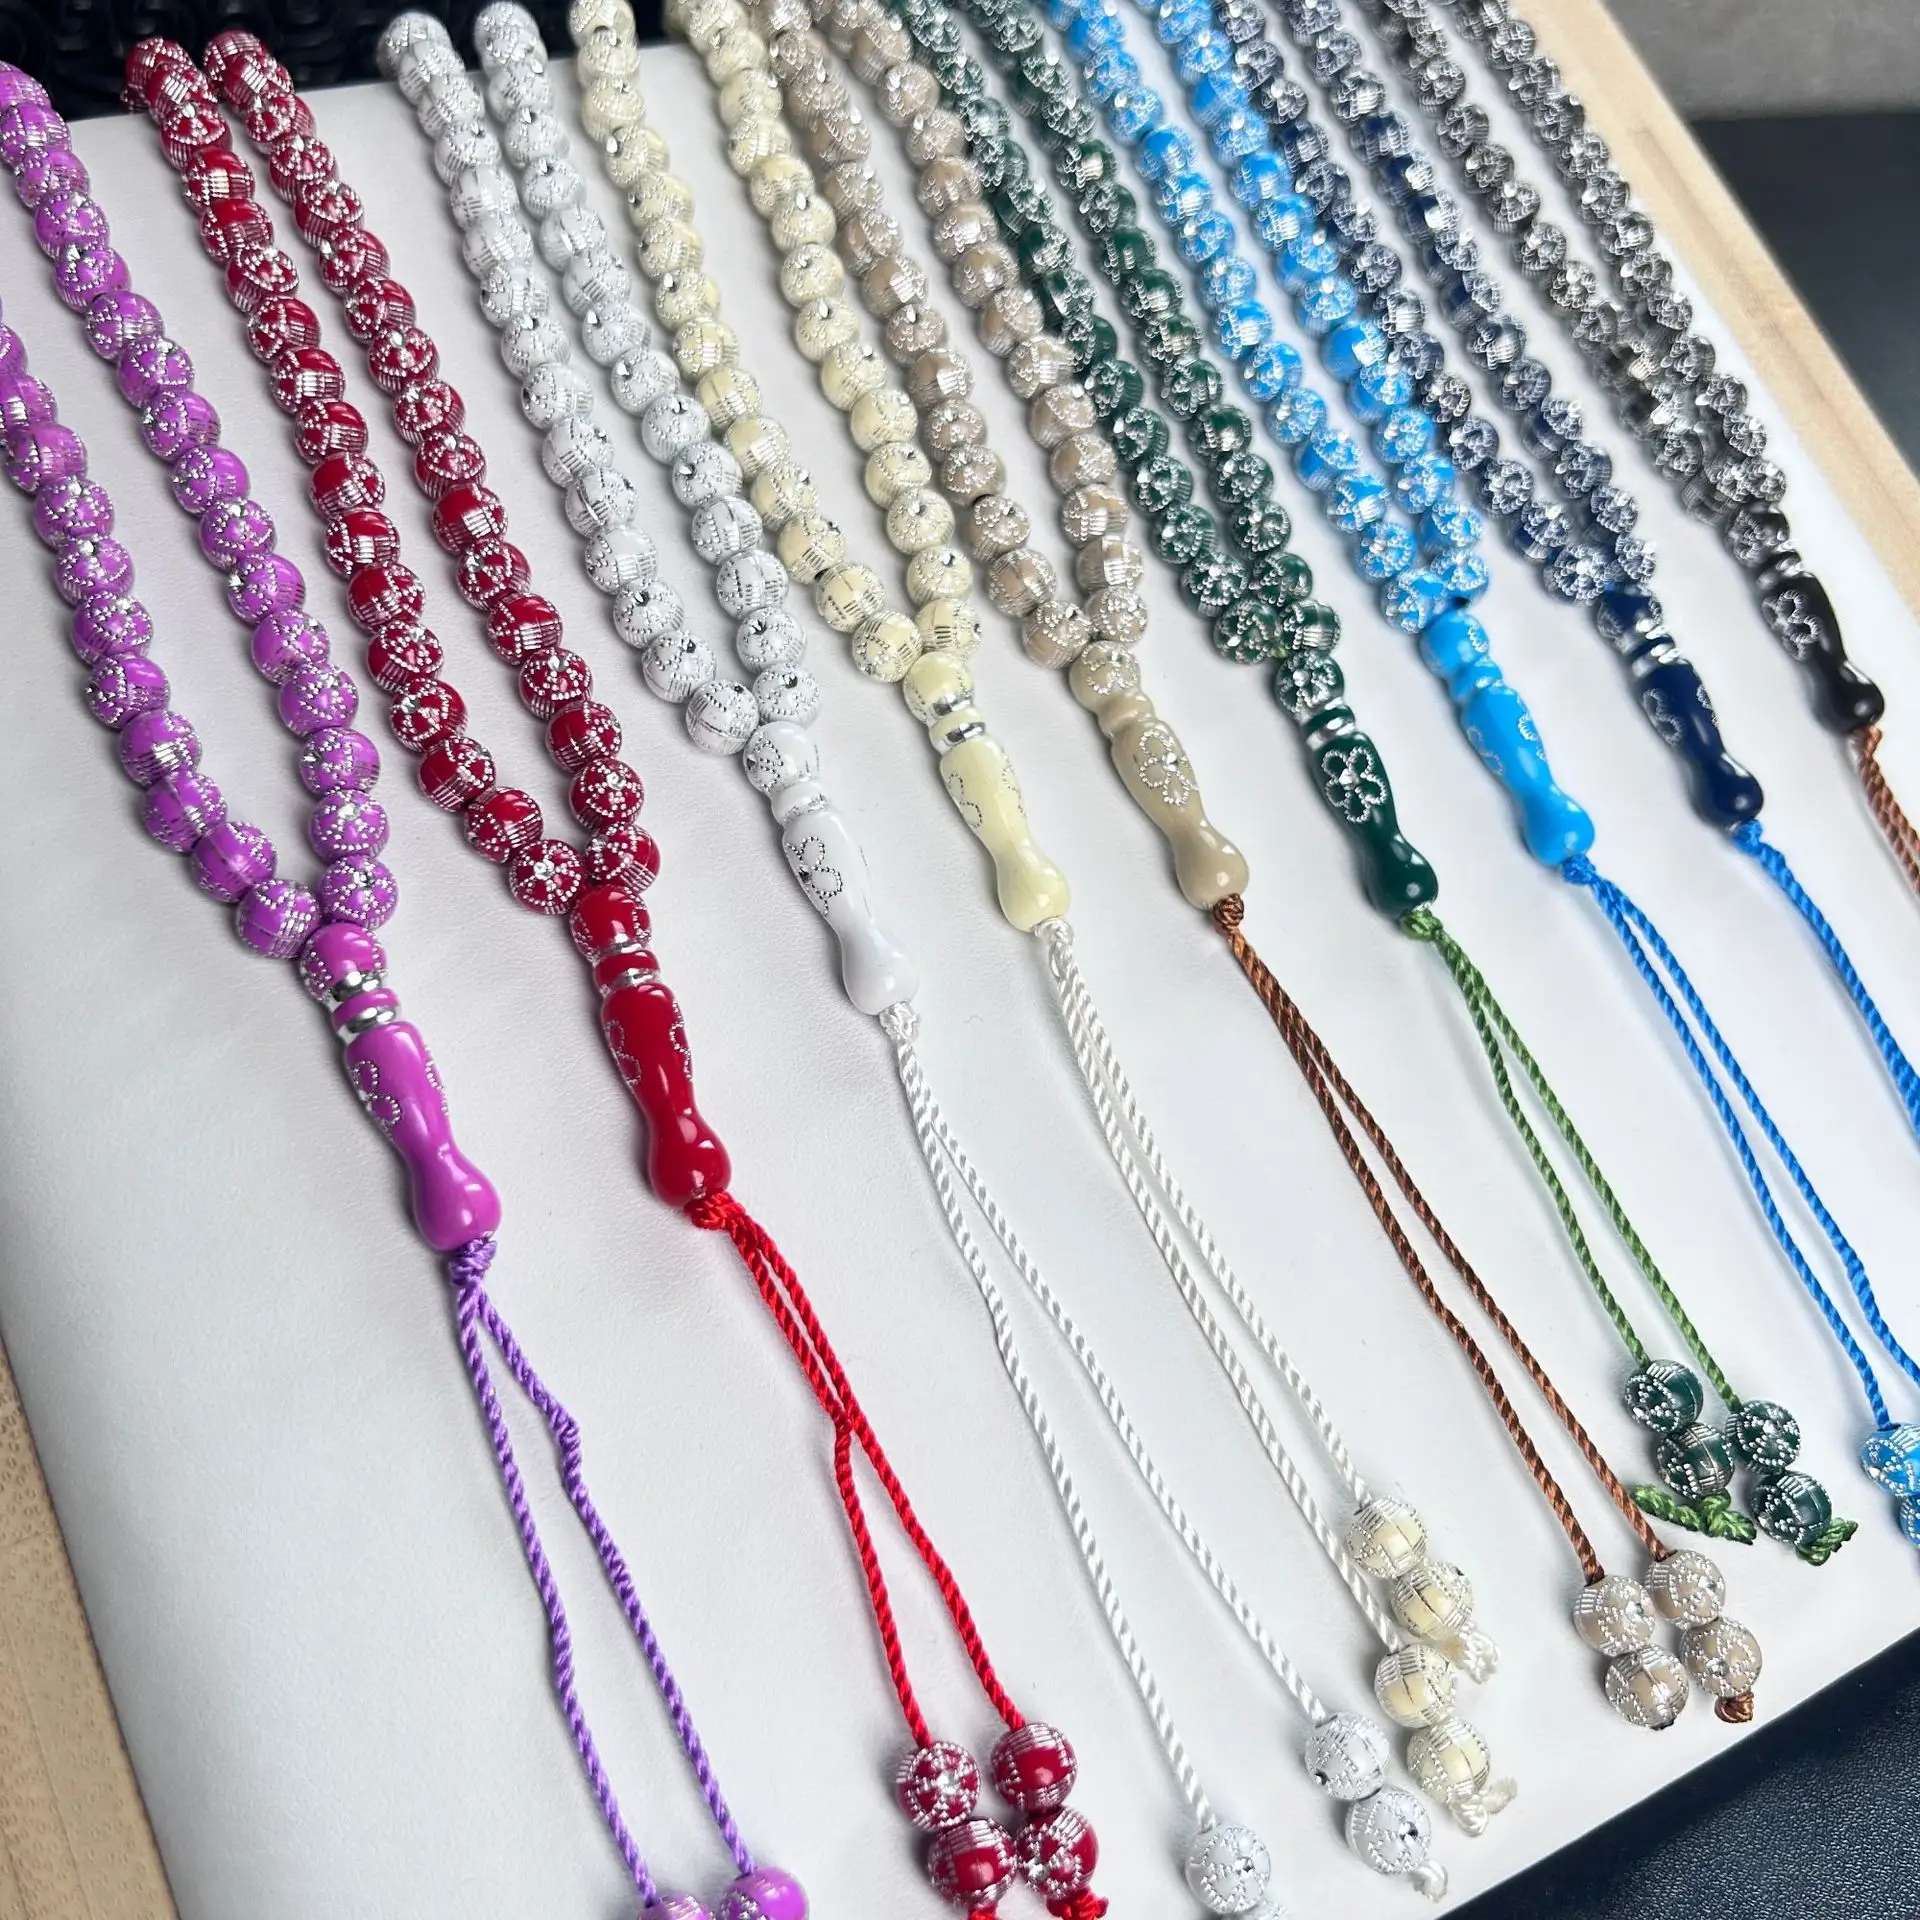 Wholesale 99pcs 8cm Acrylic Rosary Muslim necklace Beads Arab Middle East Prayer Strings islamic rosary